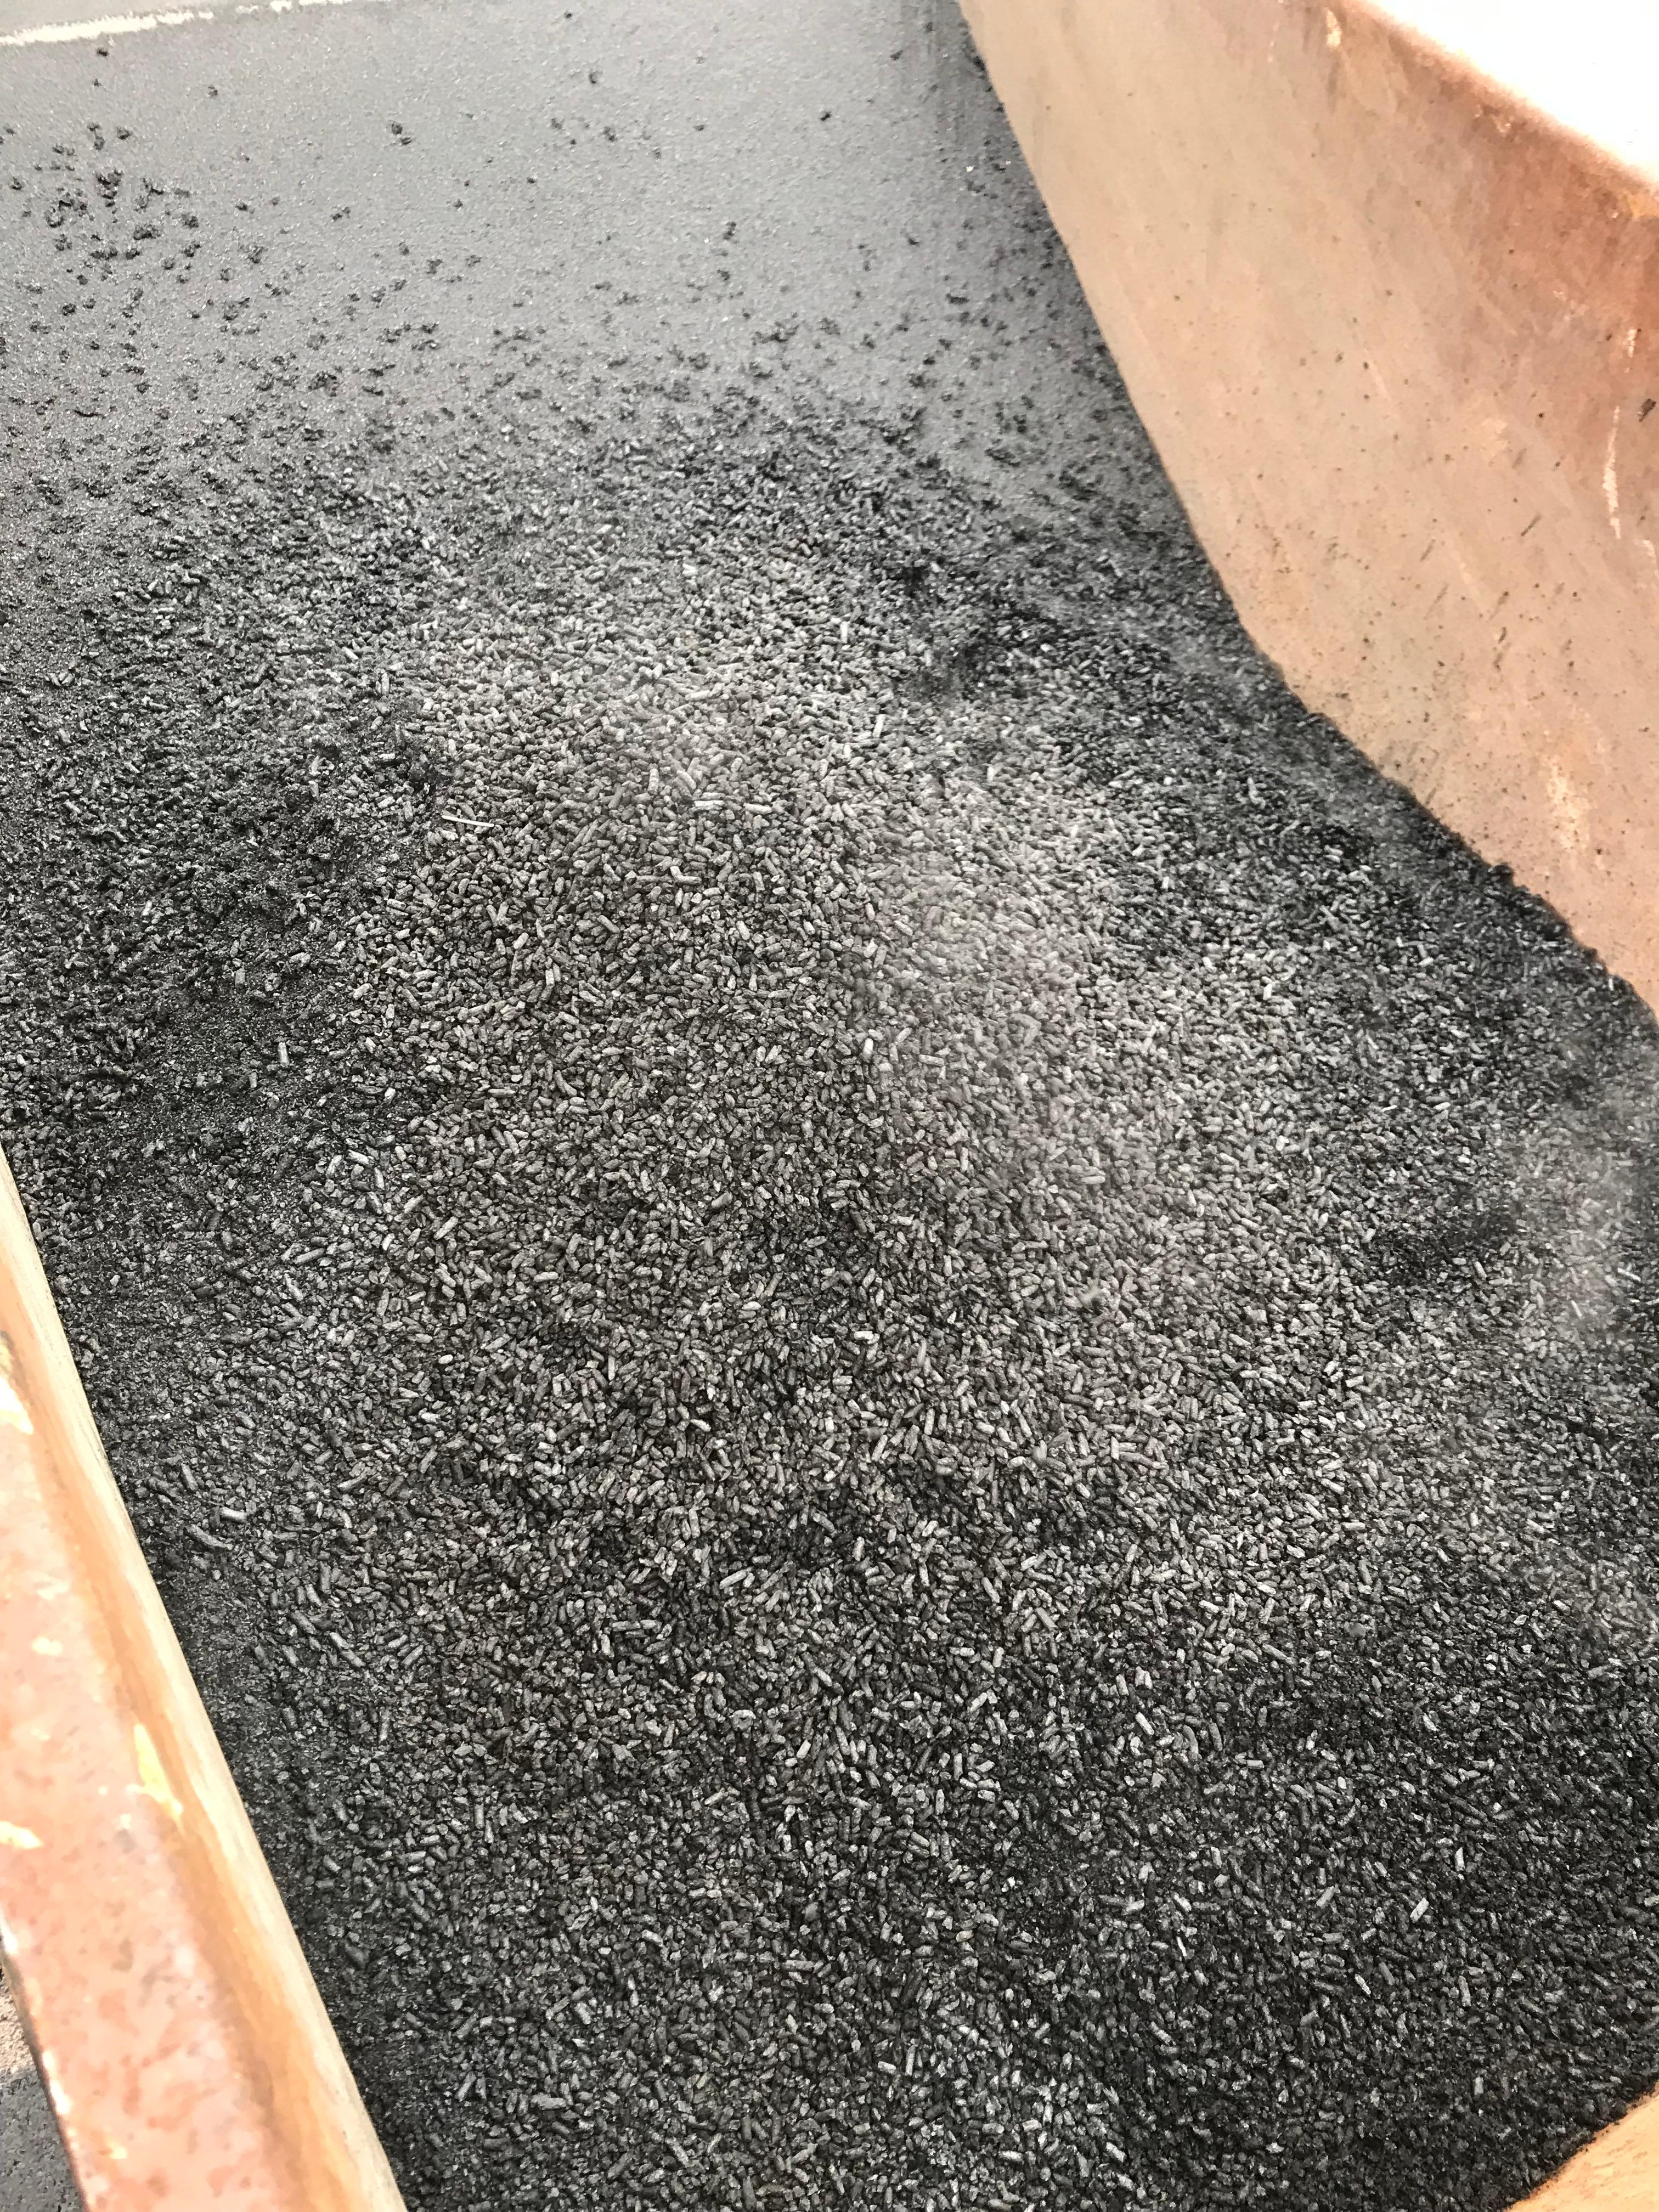 What is Biochar? And How We Can Help?